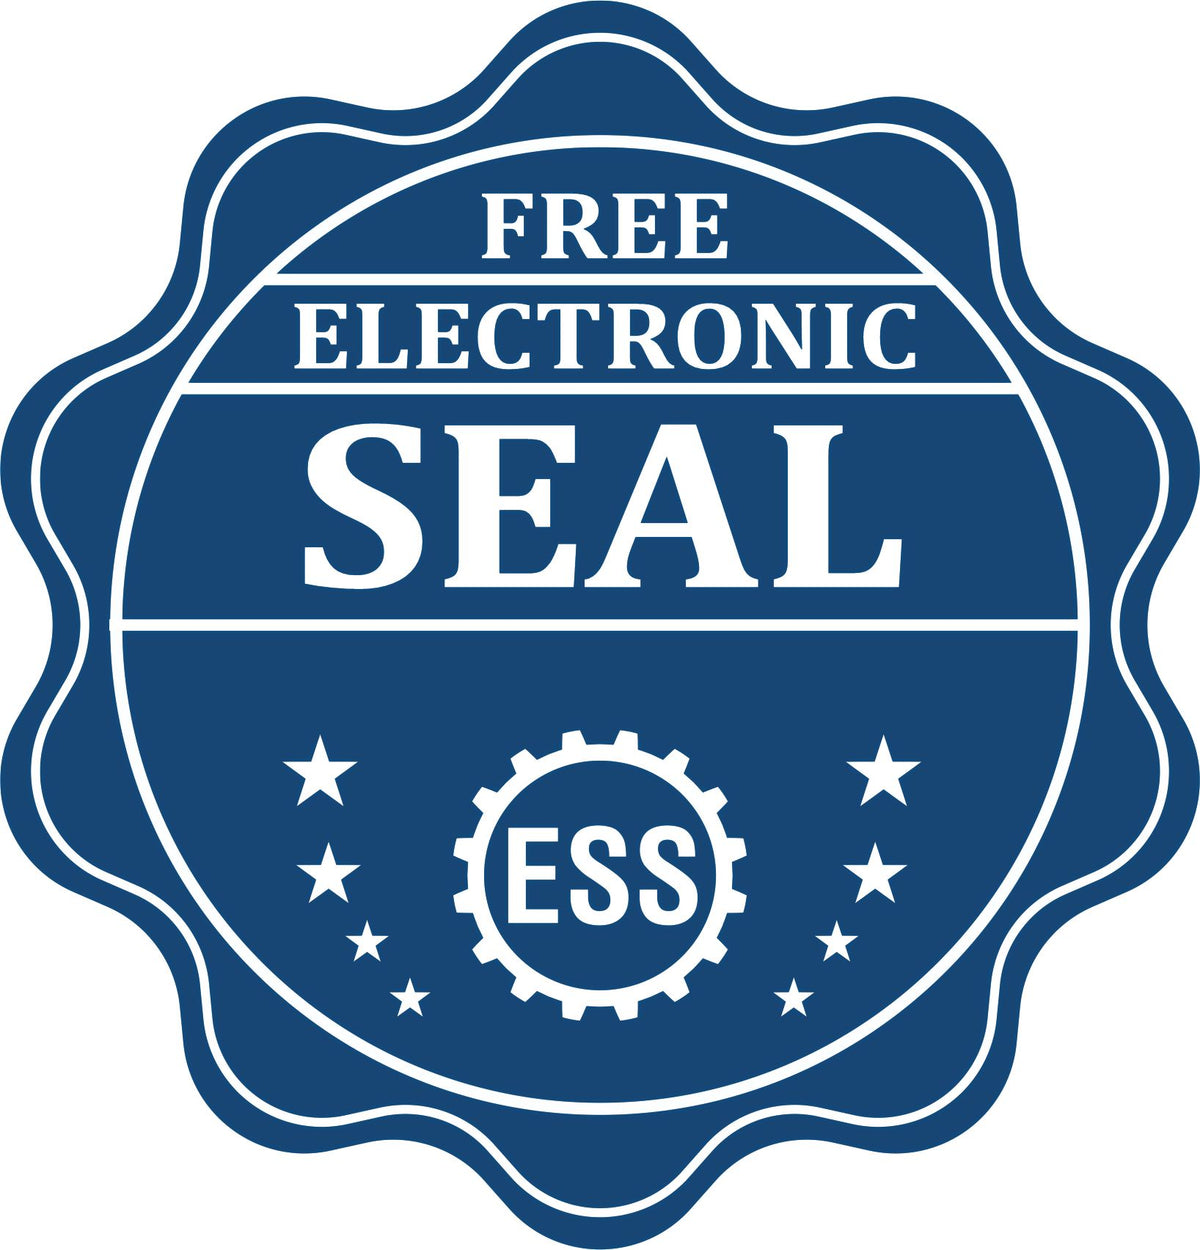 A badge showing a free electronic seal for the Slim Pre-Inked North Carolina Land Surveyor Seal Stamp with stars and the ESS gear on the emblem.